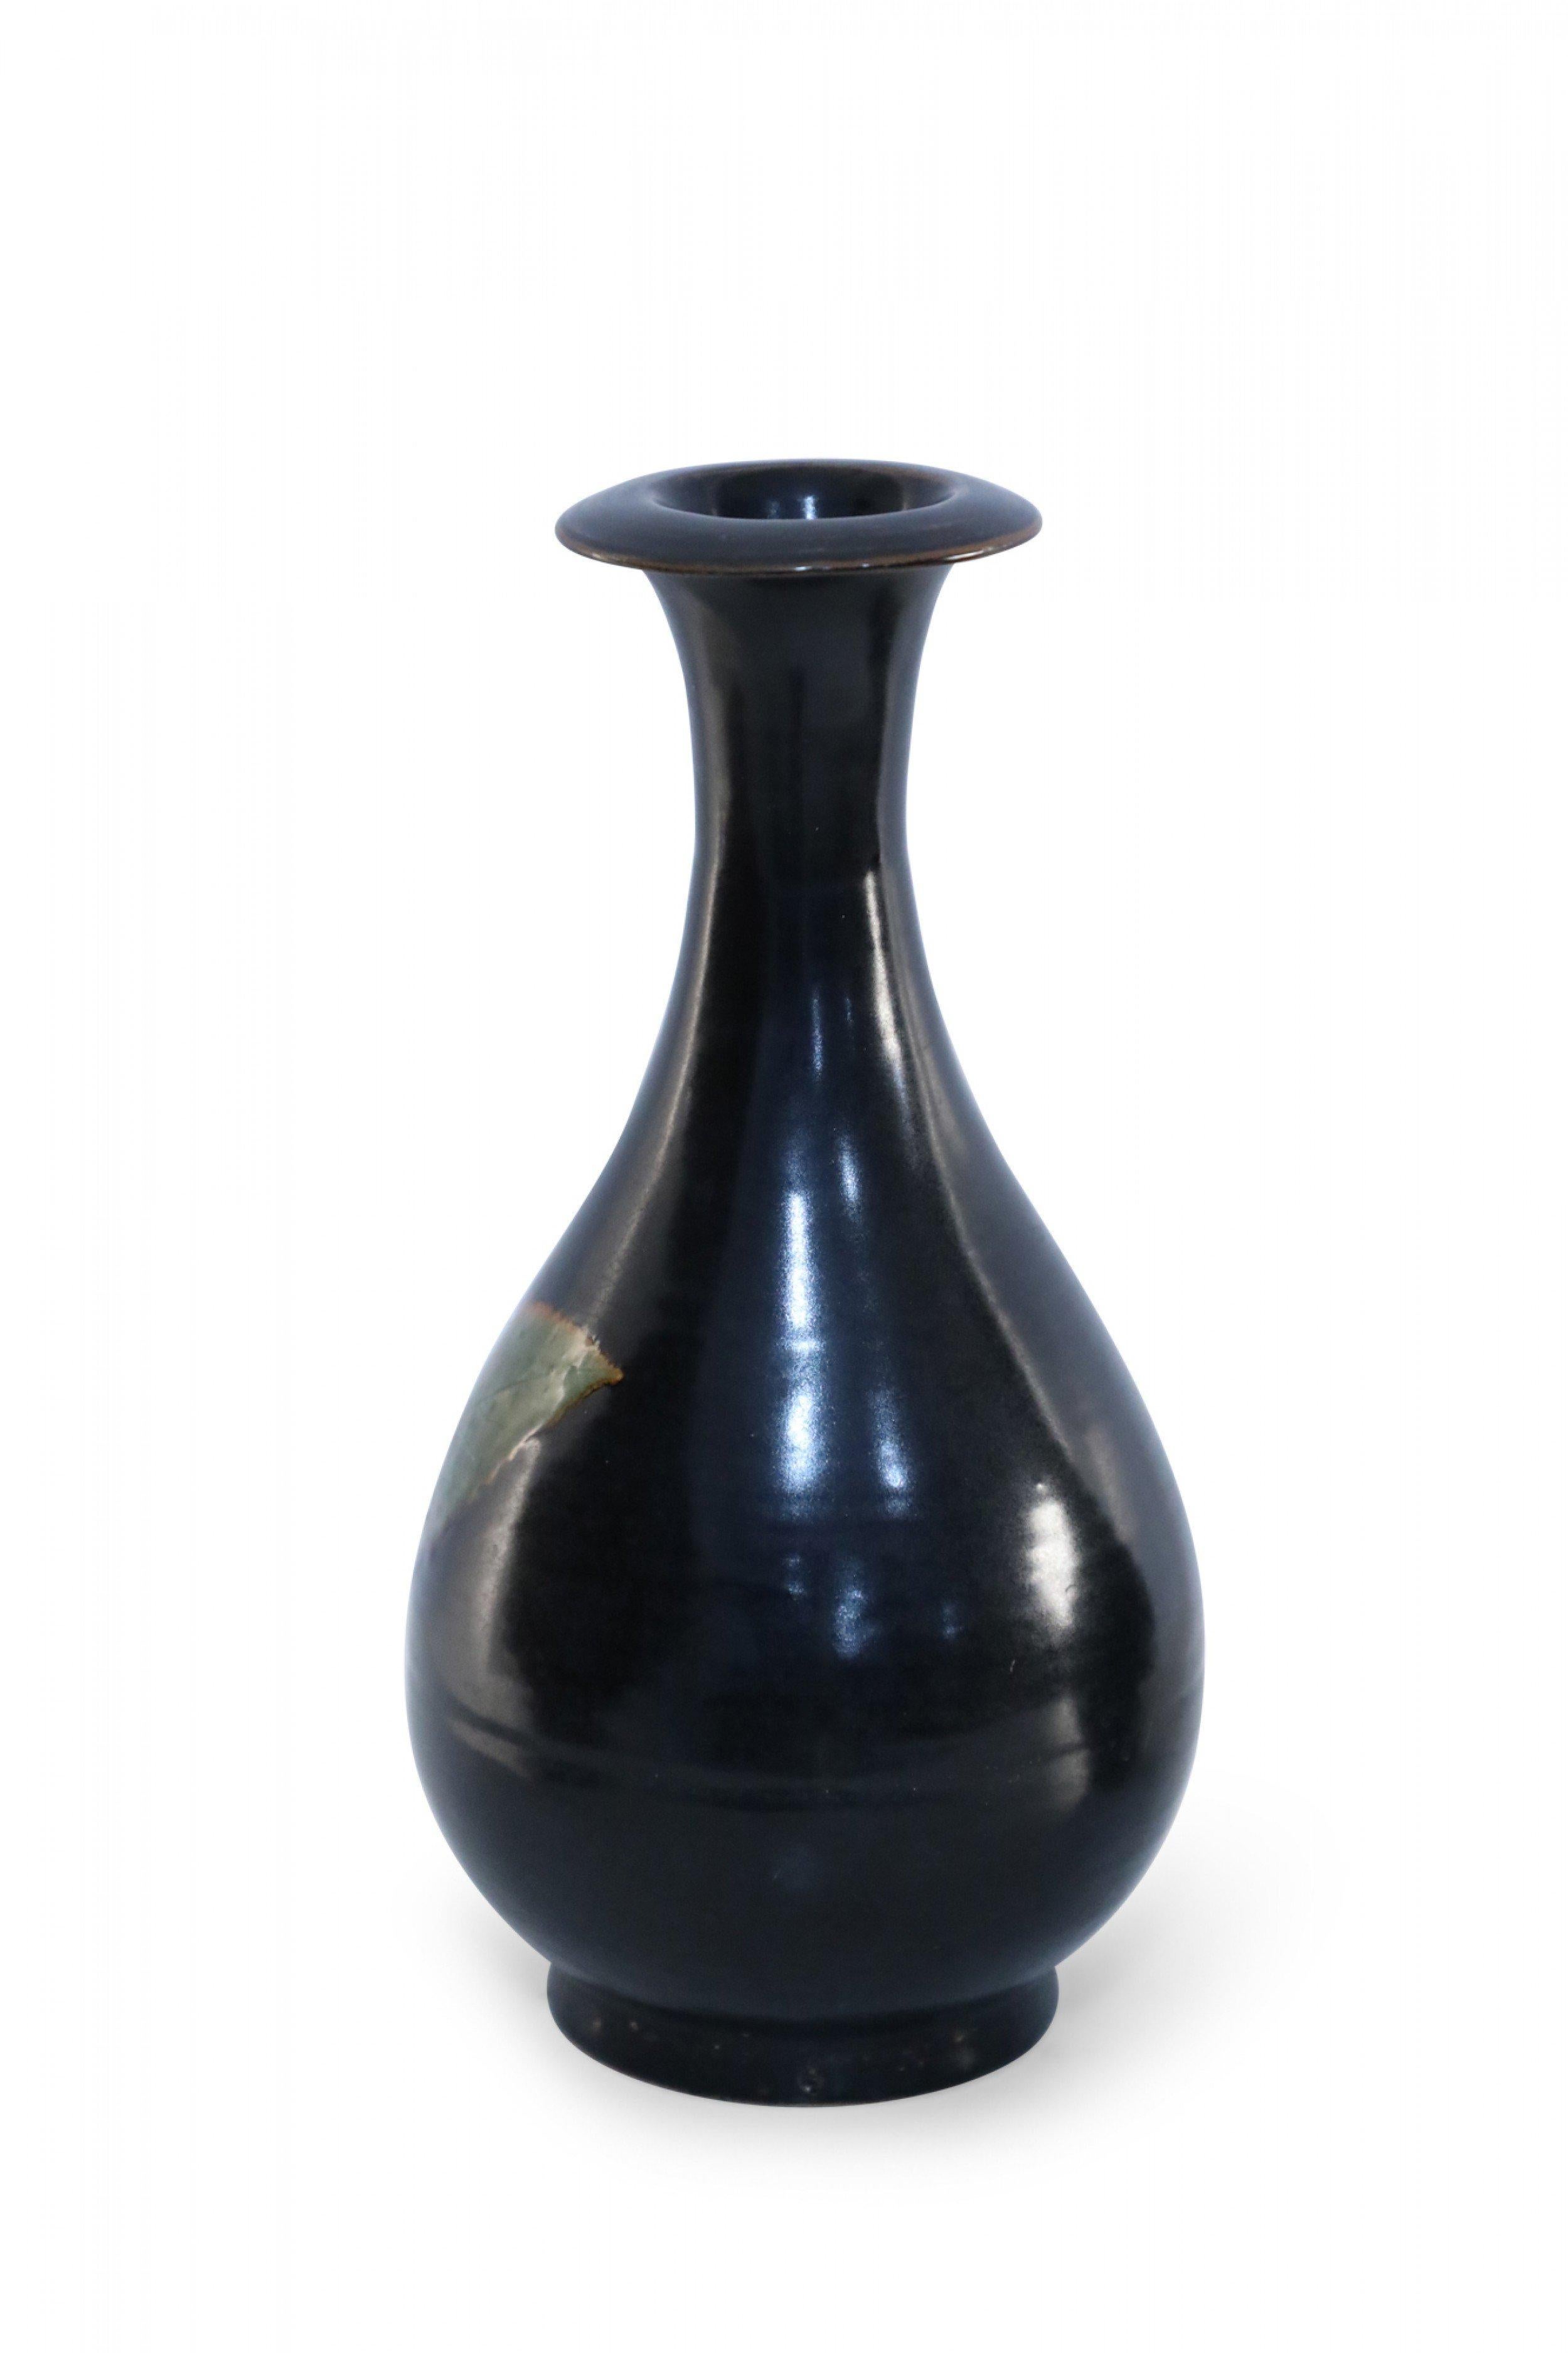 Antique Chinese (17th Century-style) black glazed ceramic pear-shaped vase decorated with a green leaf on the front and back.
   